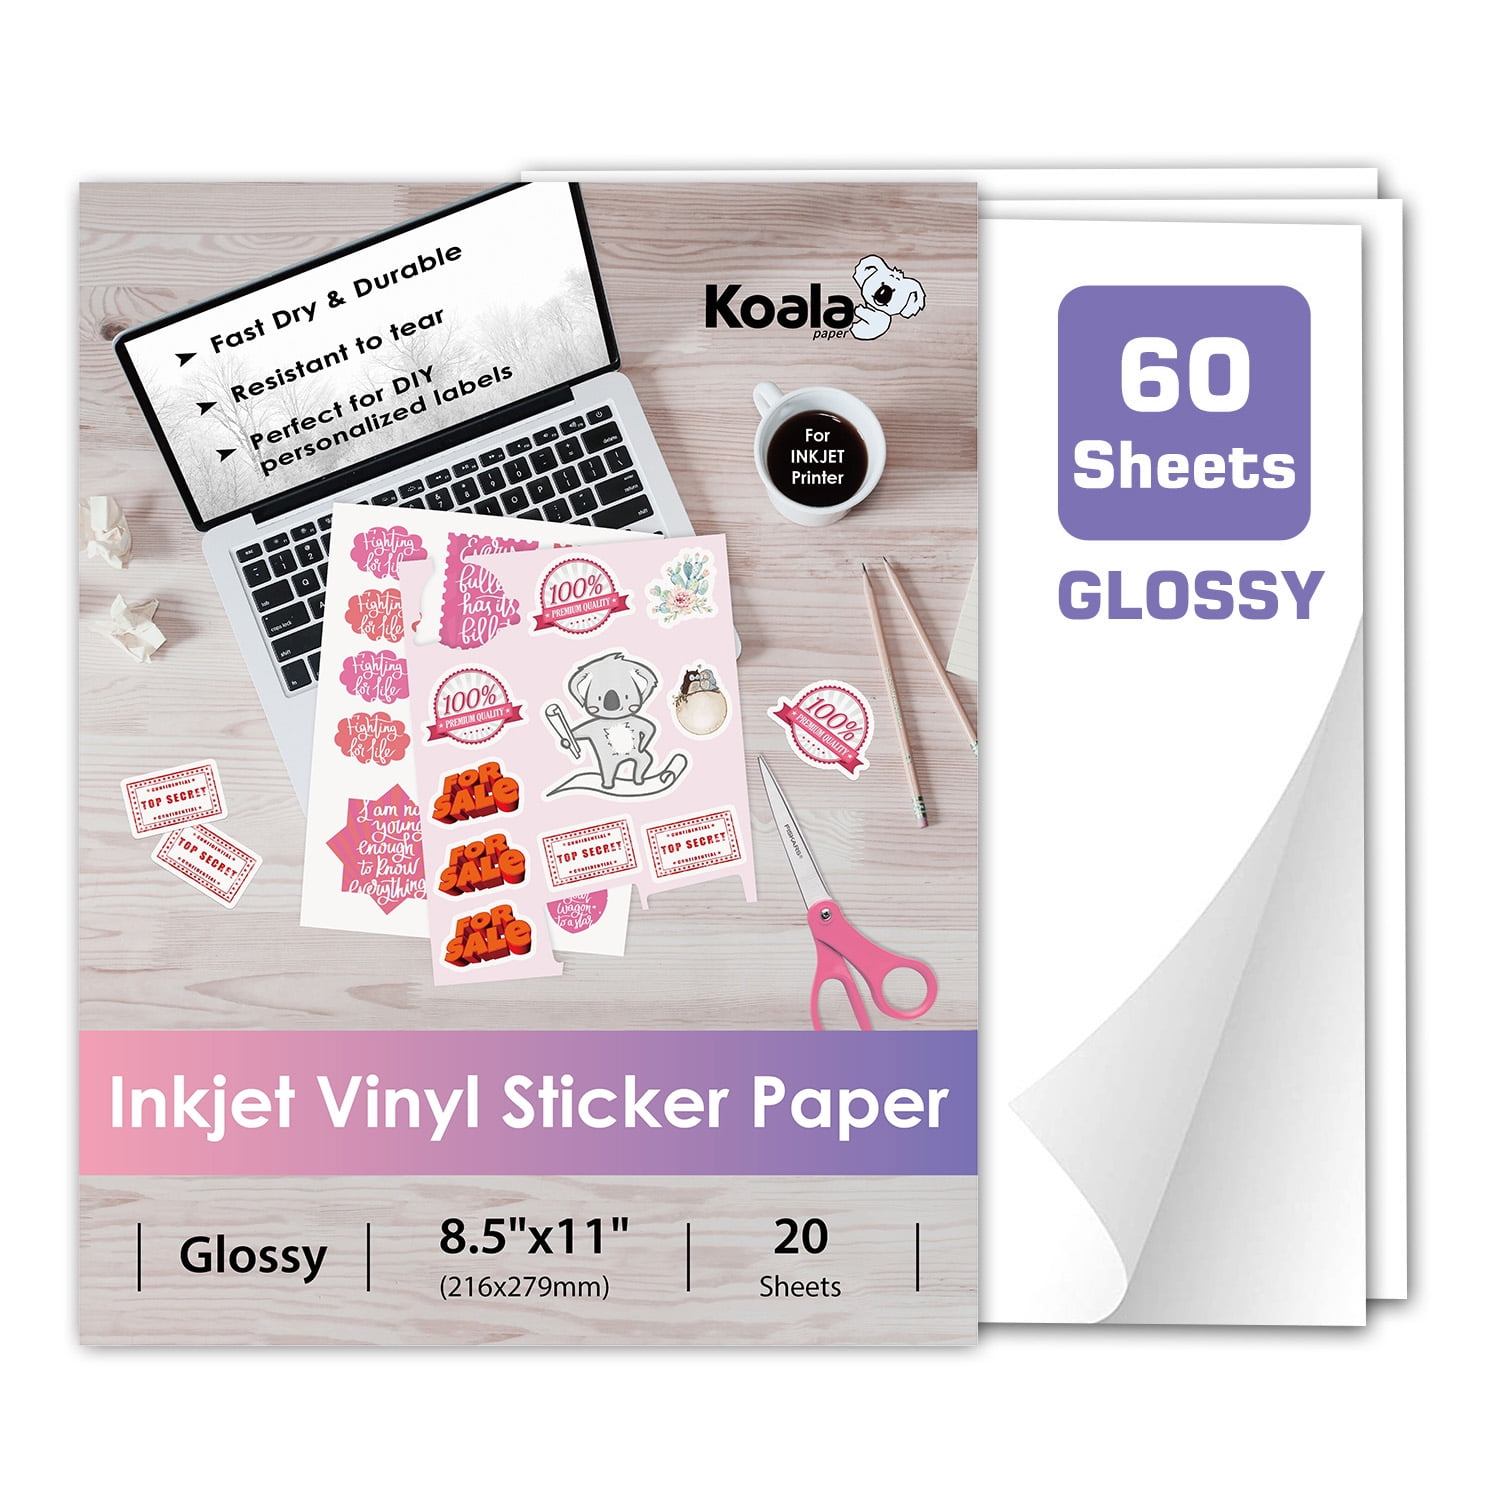 Premium Printable Vinyl Sticker Paper 20 Sheets Glossy White Waterproof Decal Paper for Inkjet Printer Vivid Colors Self-Adhesive Labels Crafts DIY Project Standard Full Letter Size 8.5x11 